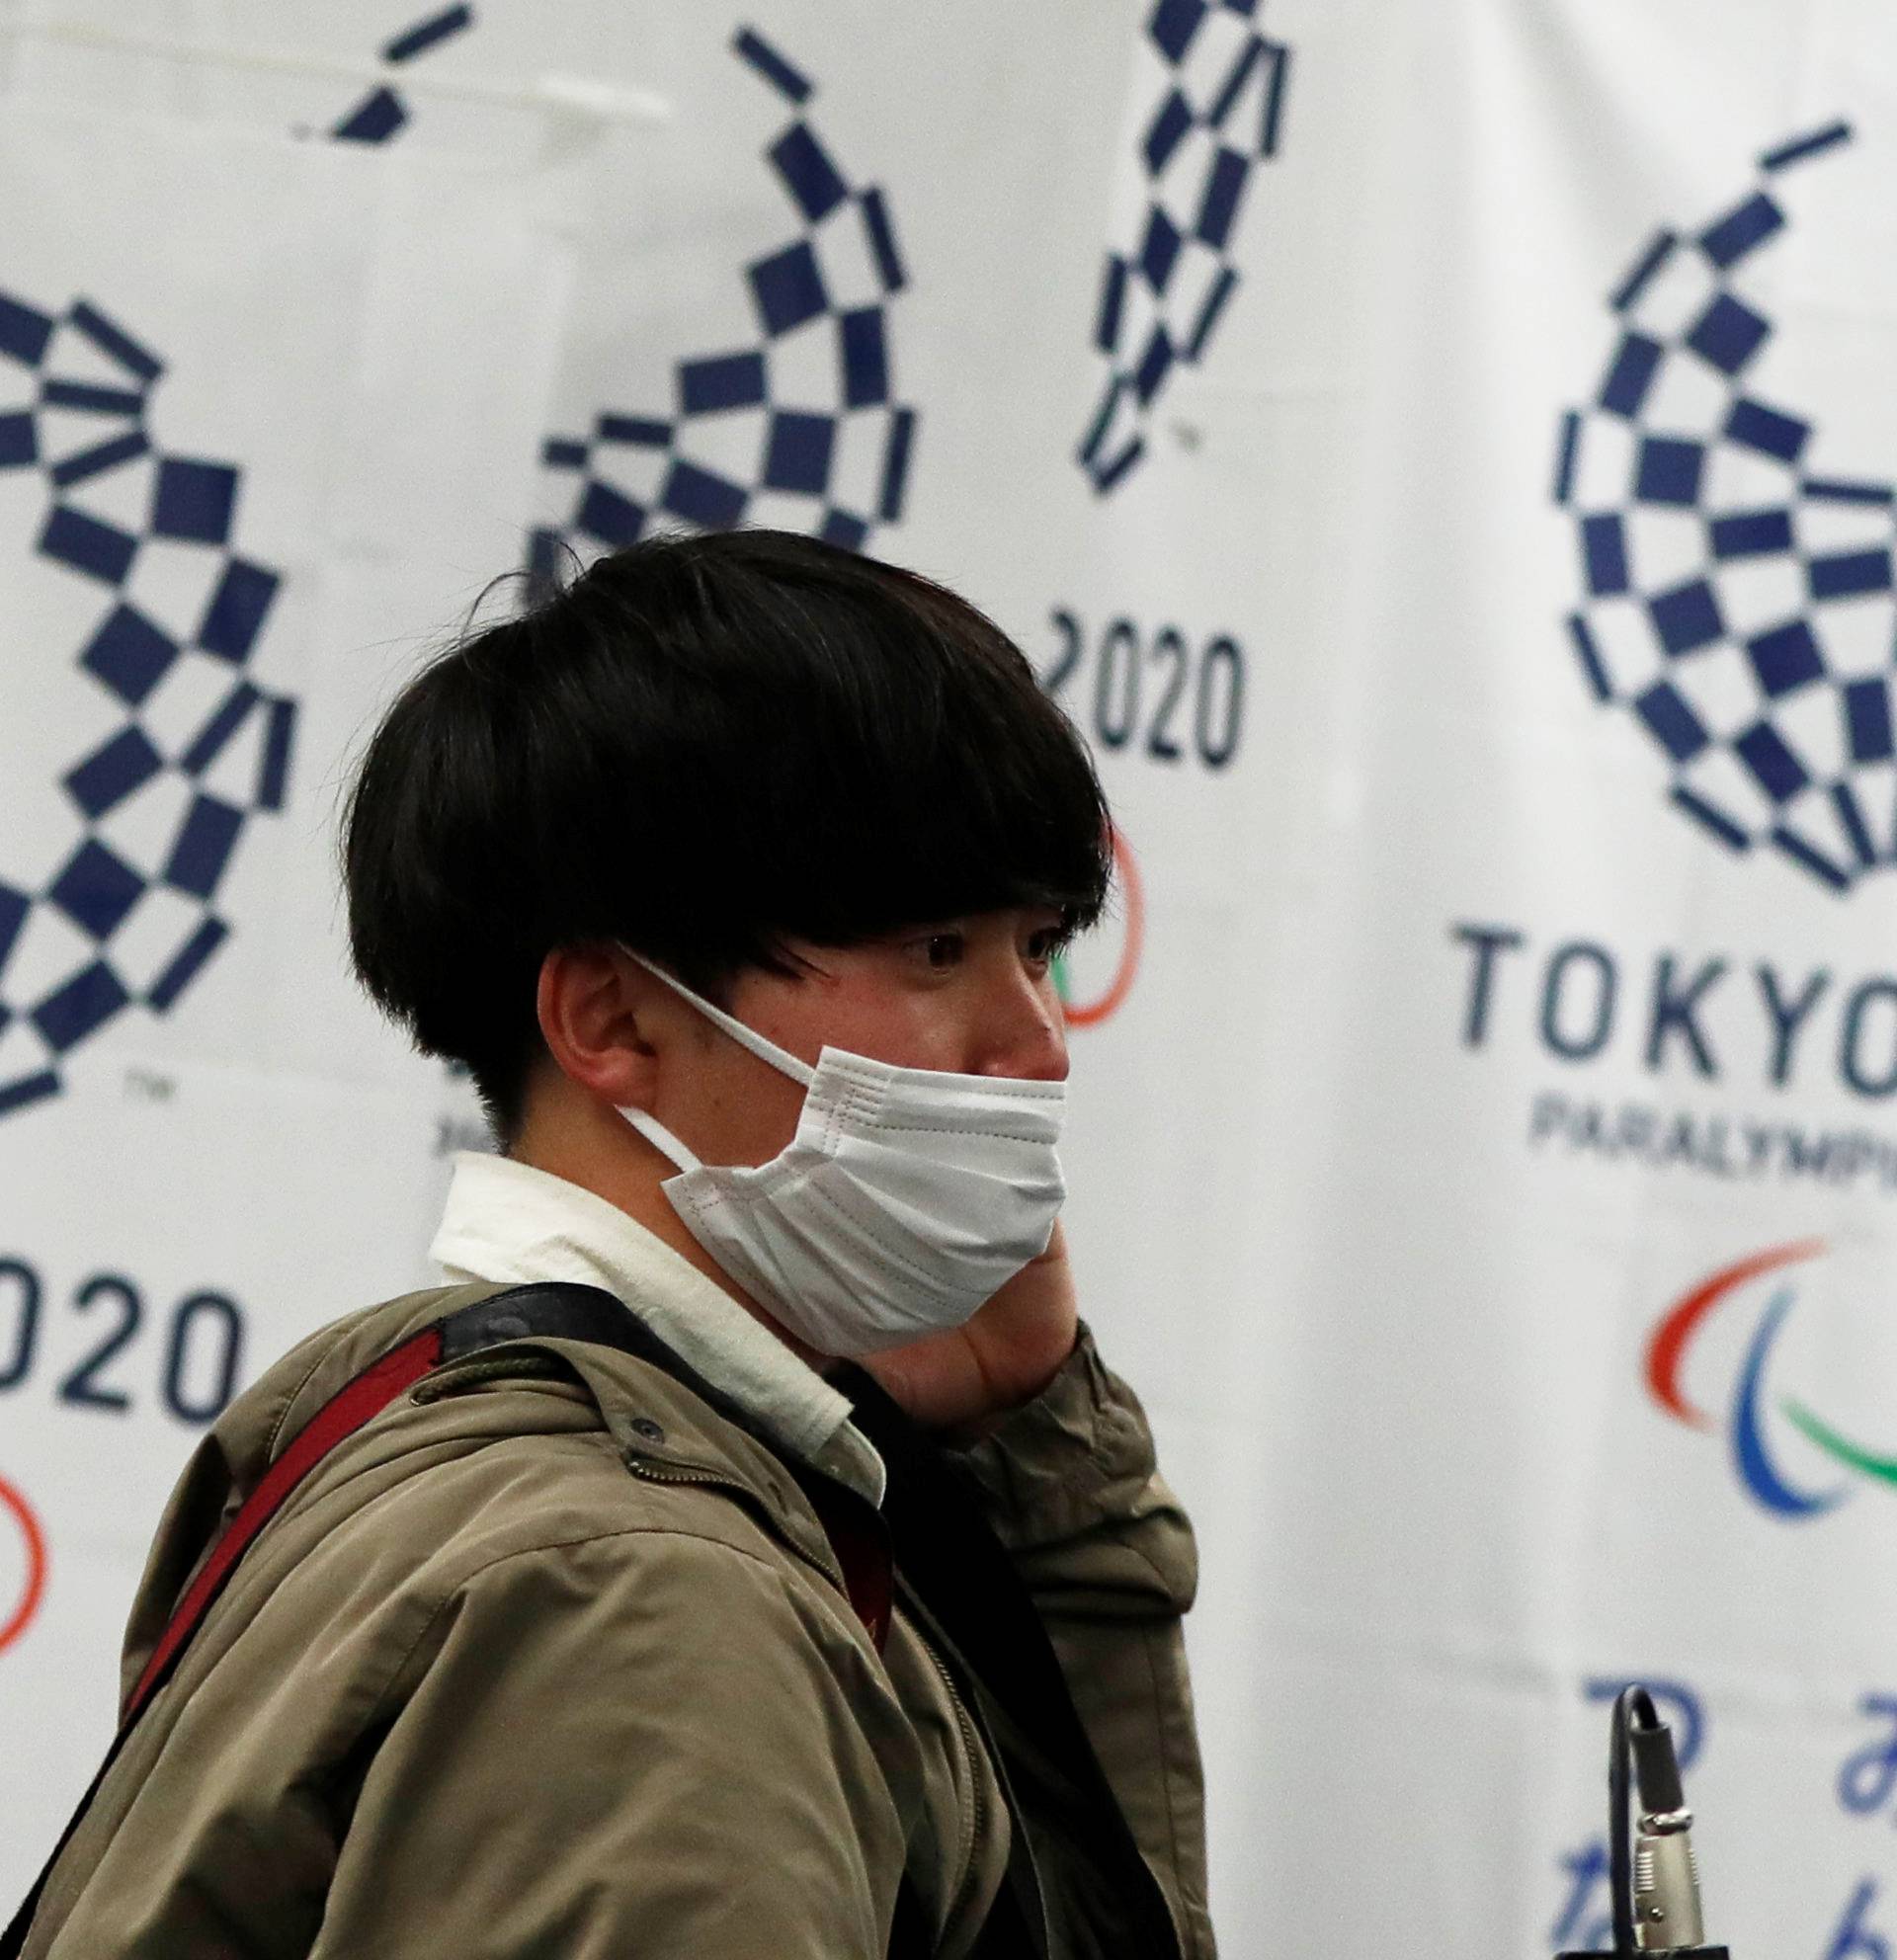 A man wearing a protective face mask, following an outbreak of the coronavirus disease (COVID-19), walks in front of flags of the Tokyo 2020 Olympic and Paralympic Games in Tokyo